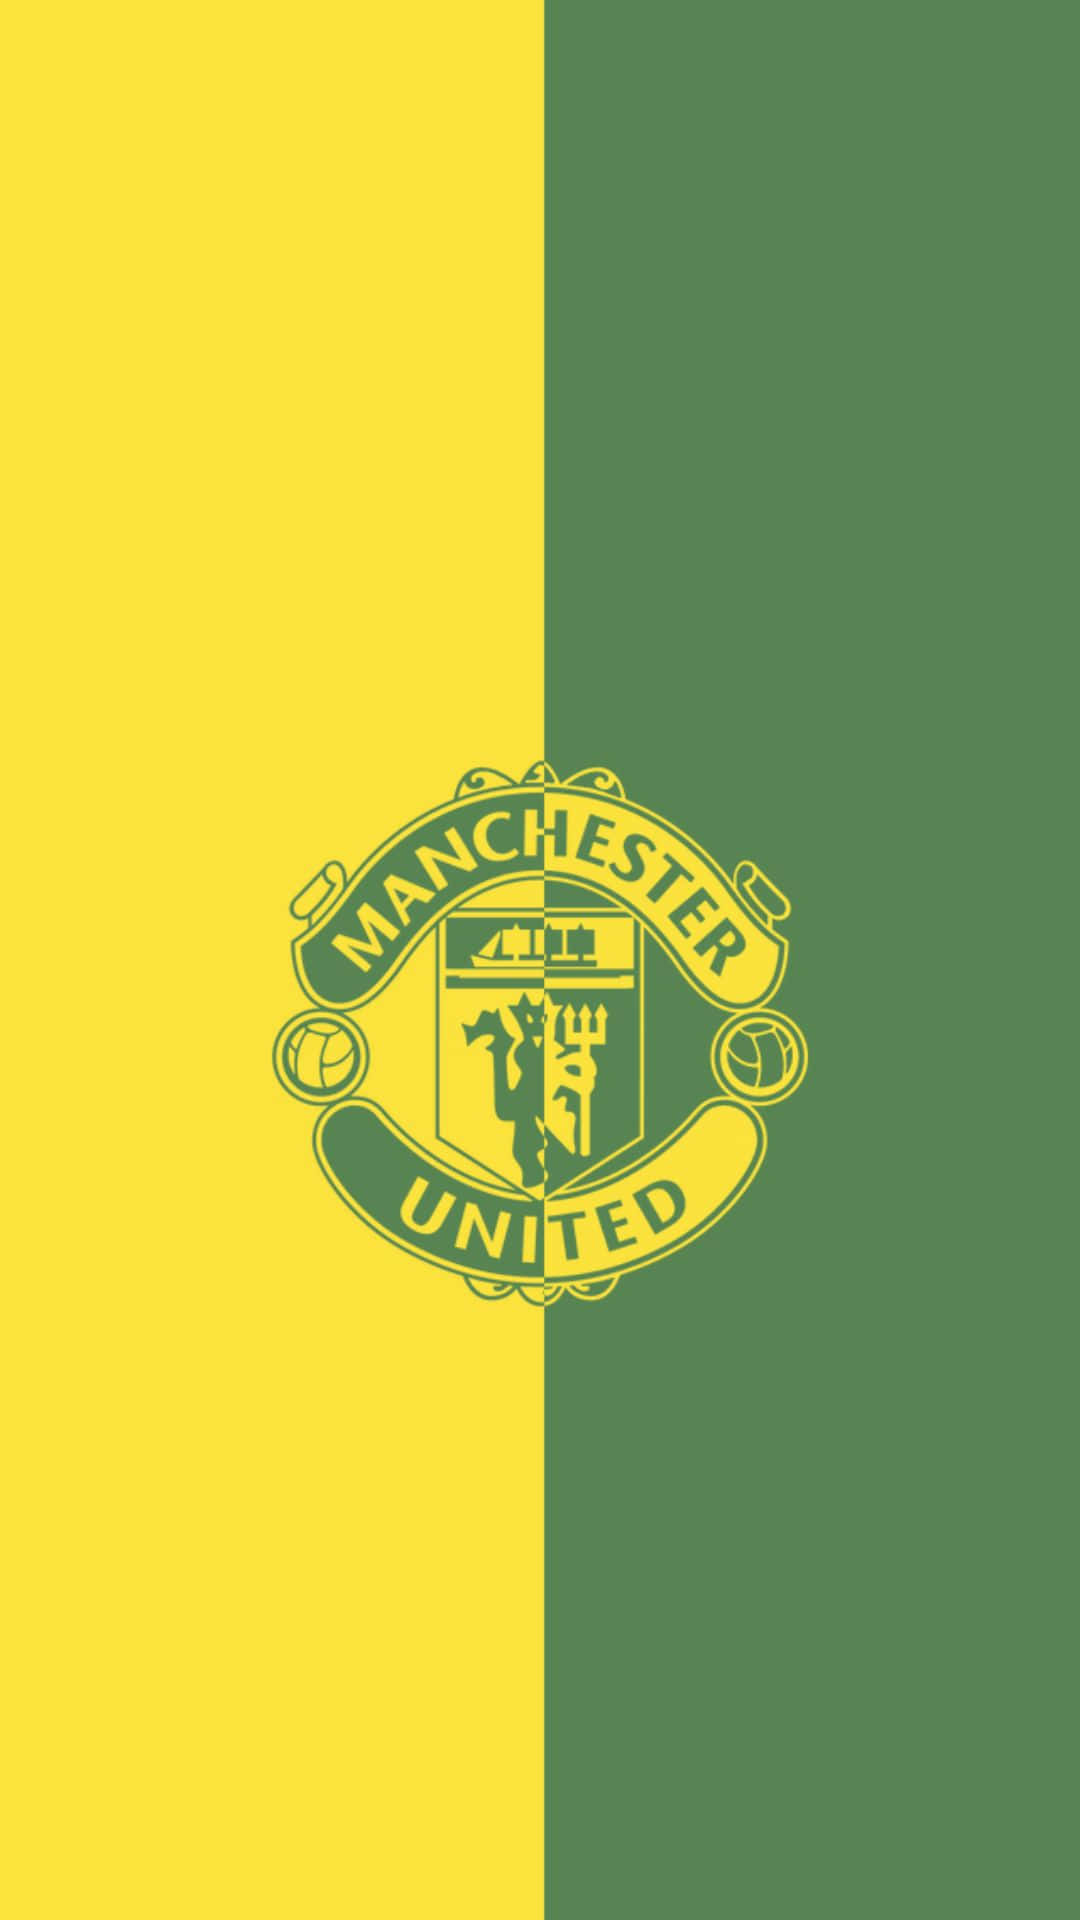 Top 999+ Manchester United Logo Wallpapers Full HD, 4K✅Free to Use